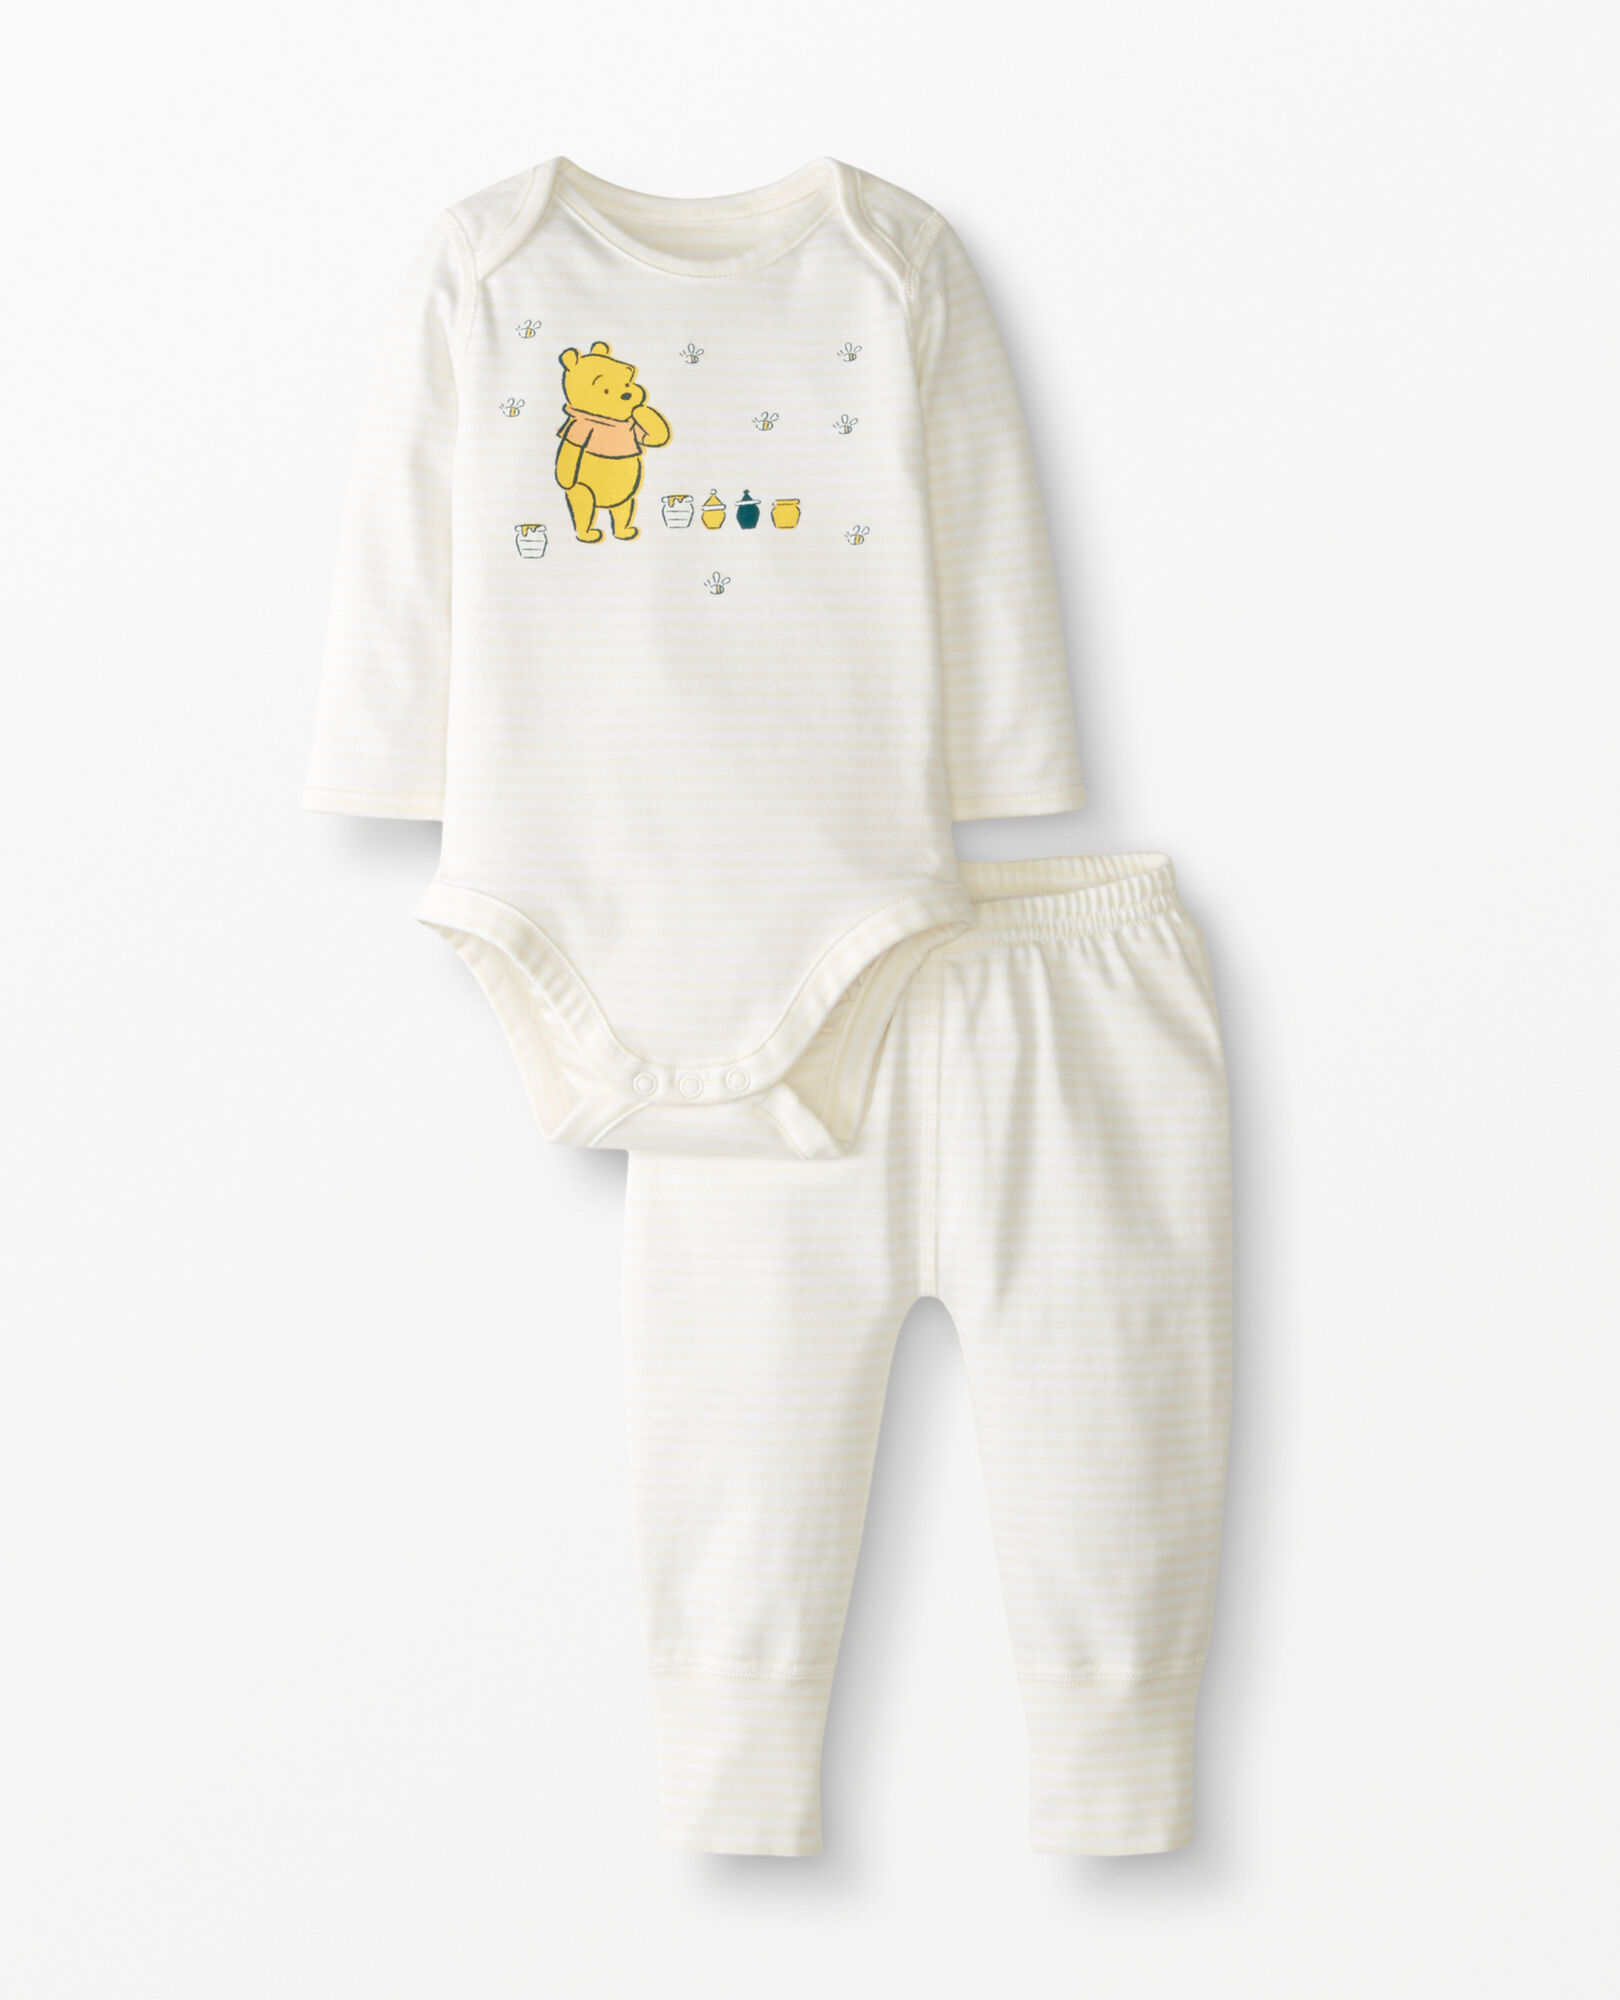 winnie the pooh baby boy outfit